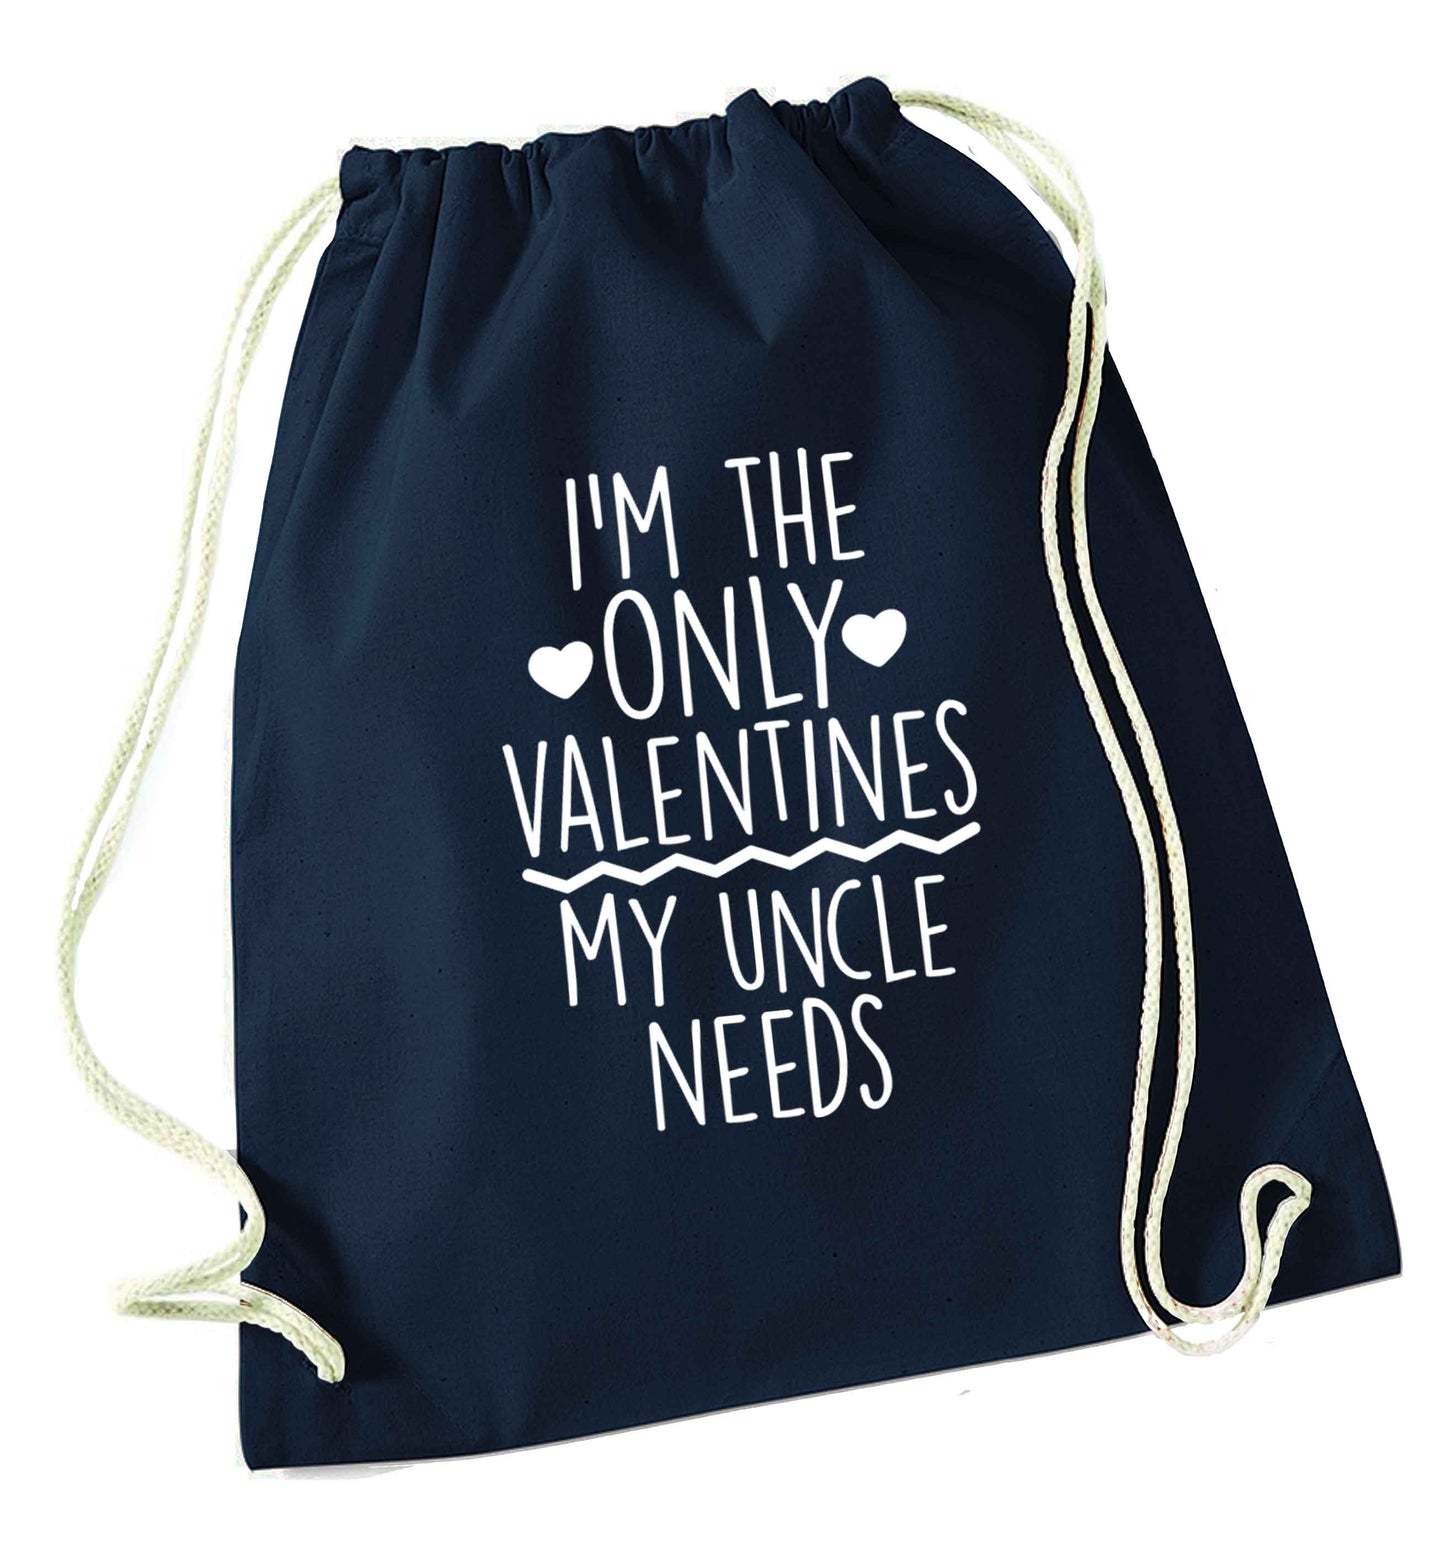 I'm the only valentines my uncle needs navy drawstring bag